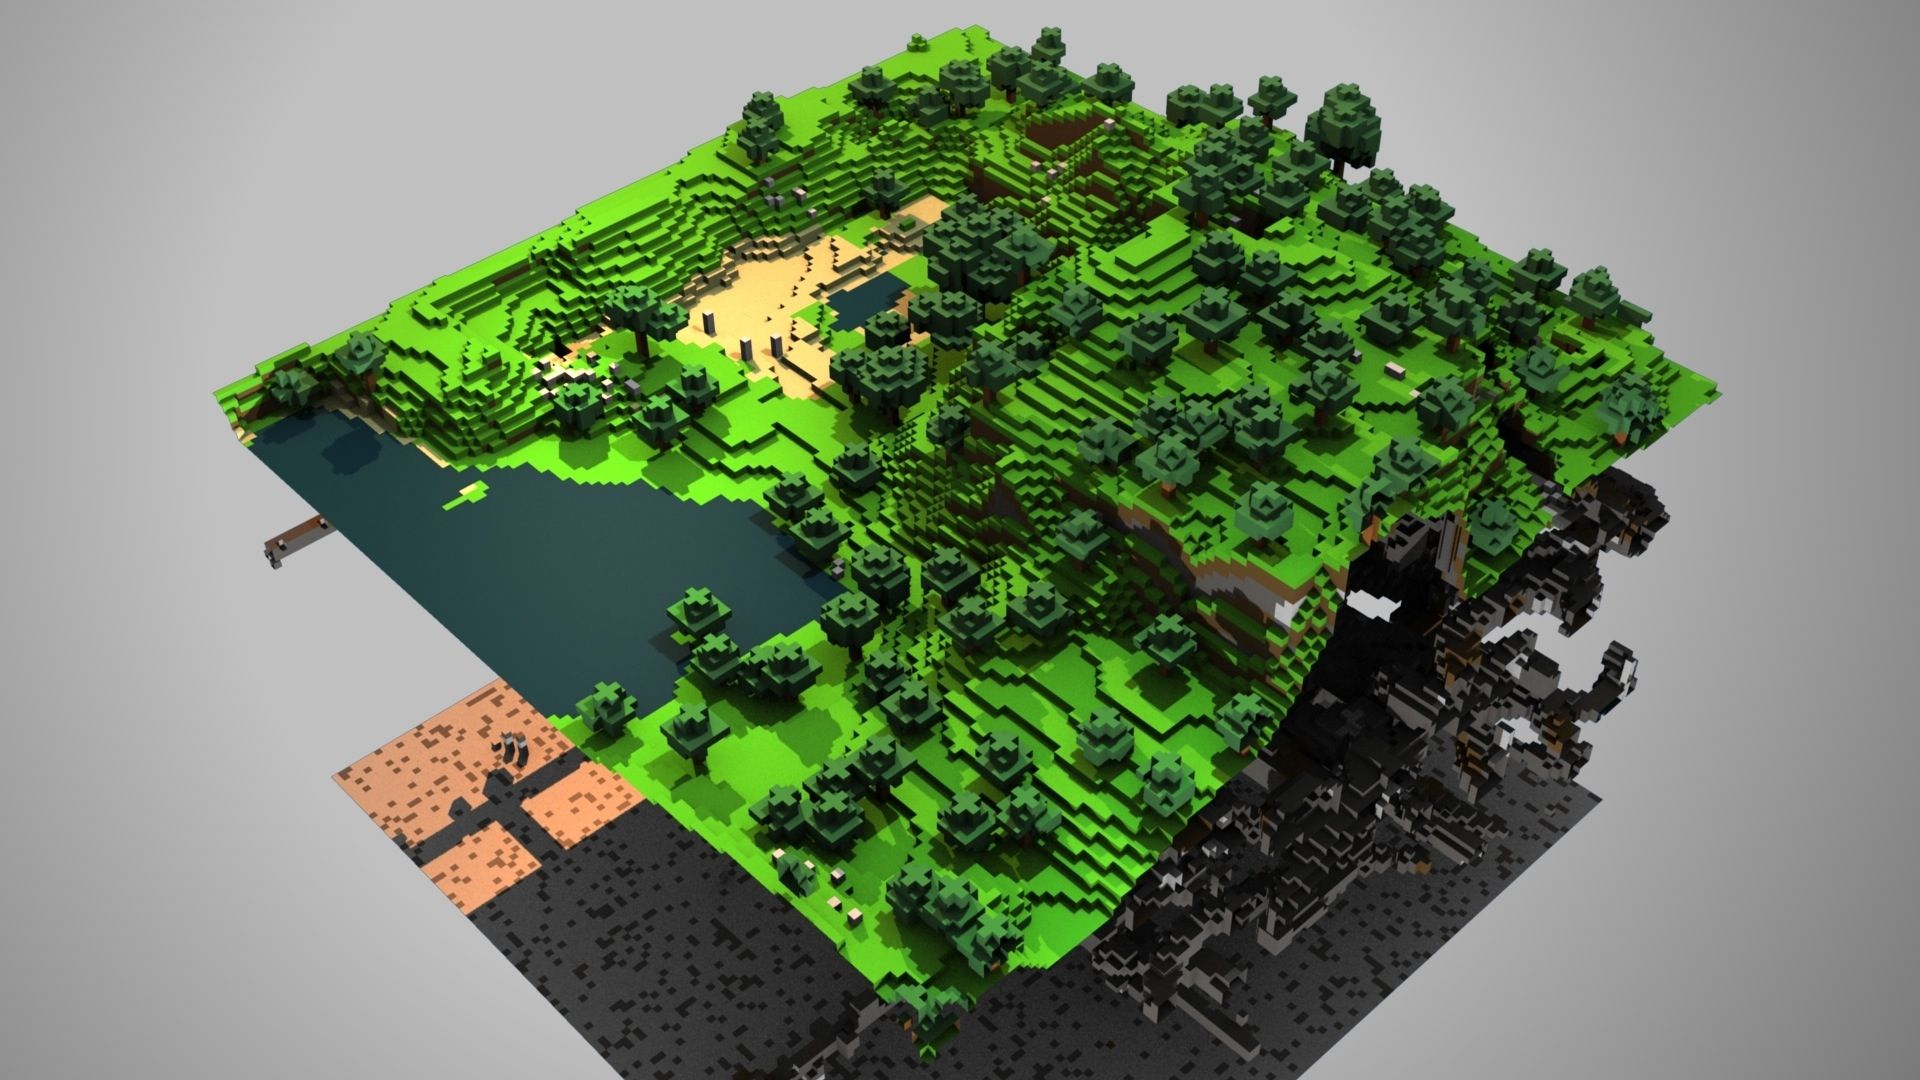 Download Wallpaper 1920x1080 Minecraft, Ground, Trees, Lake Full